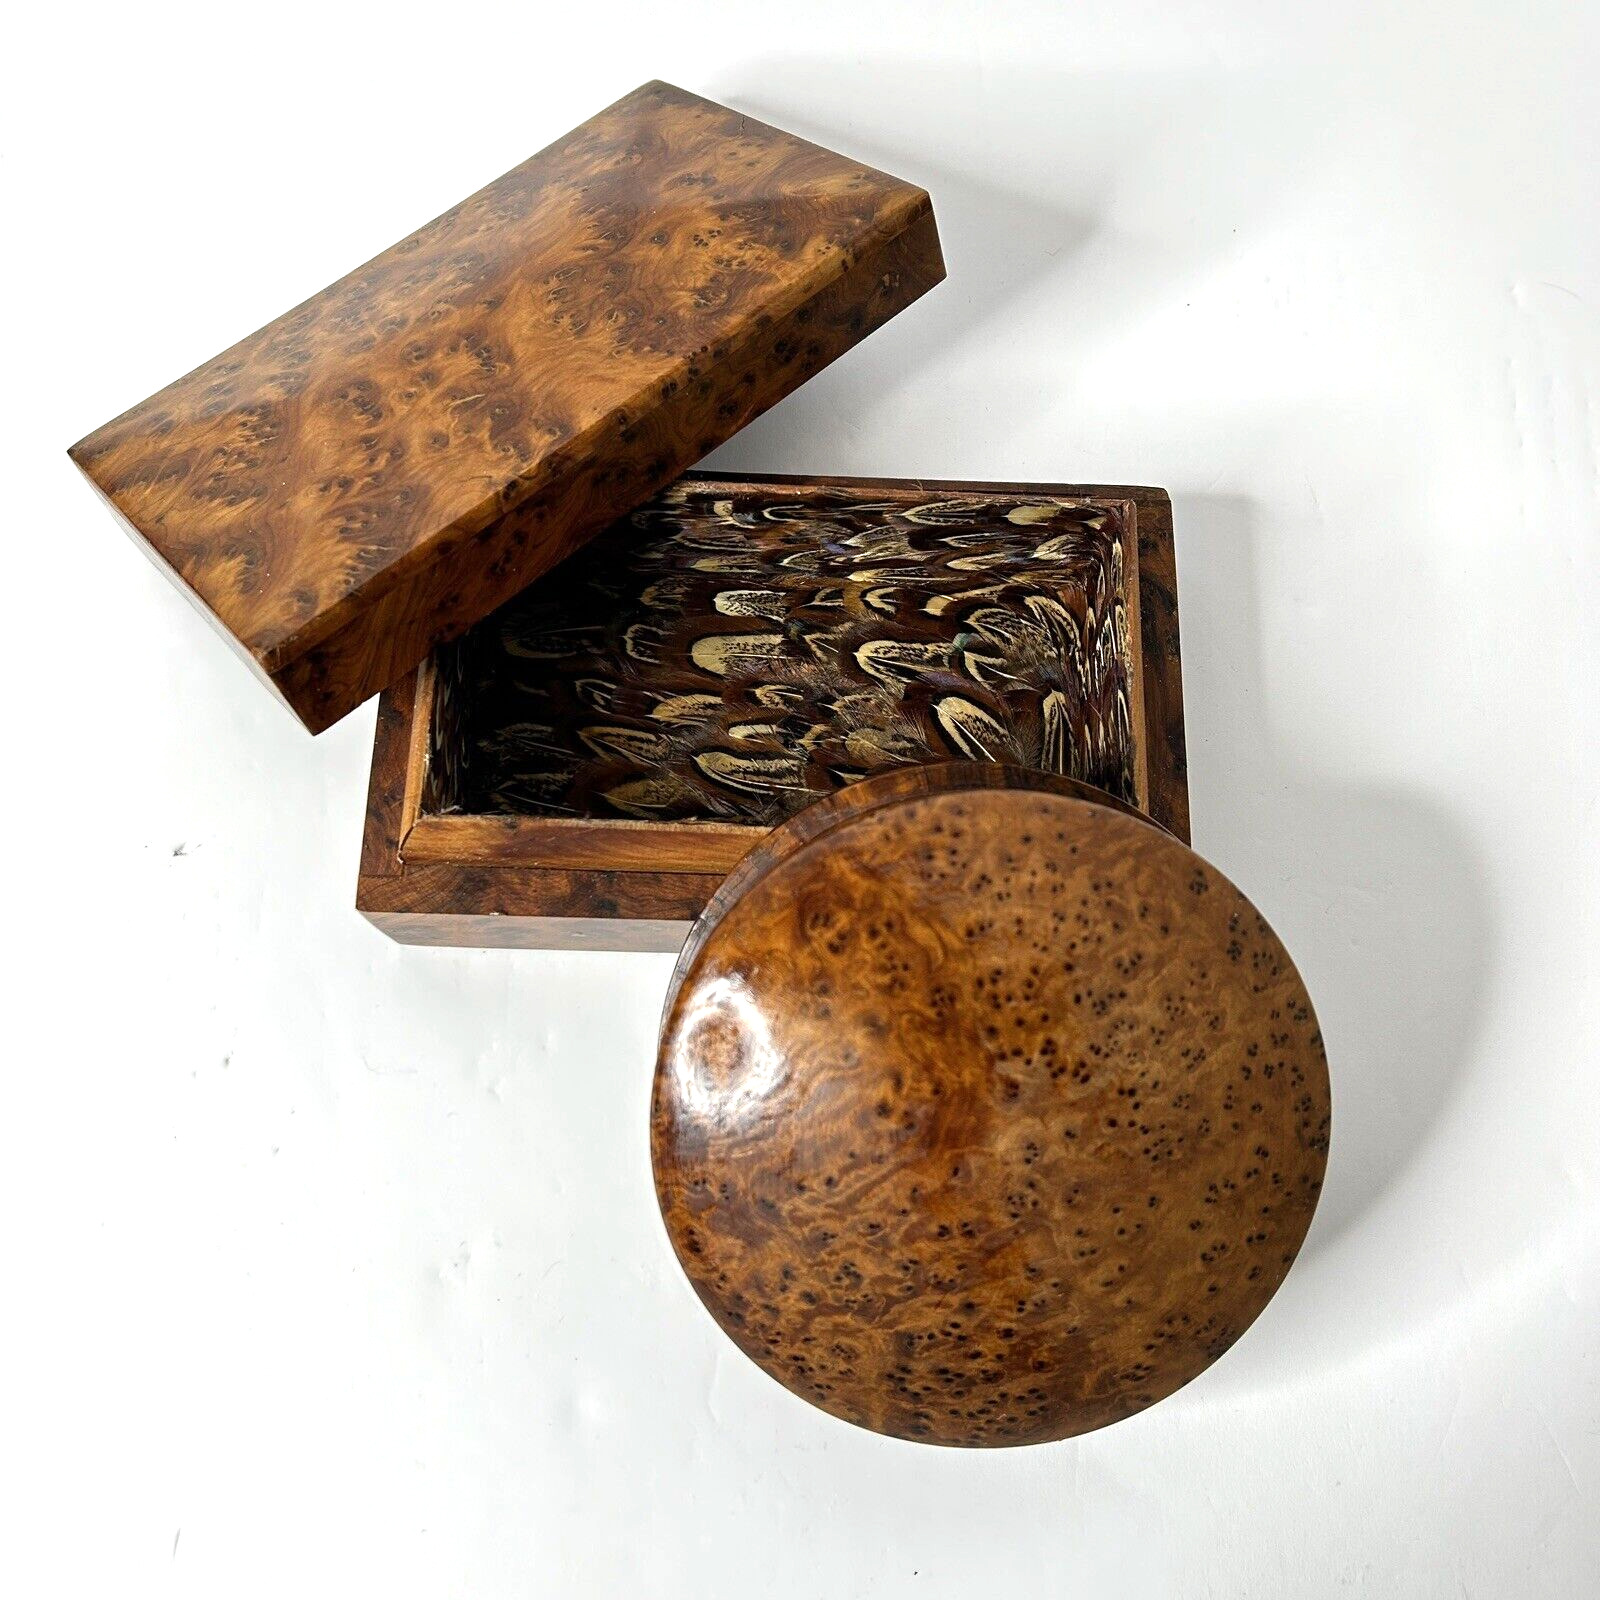 Vintage Moroccan Exotic Thuya Burl Wood Boxes: One For Repair Set of 2